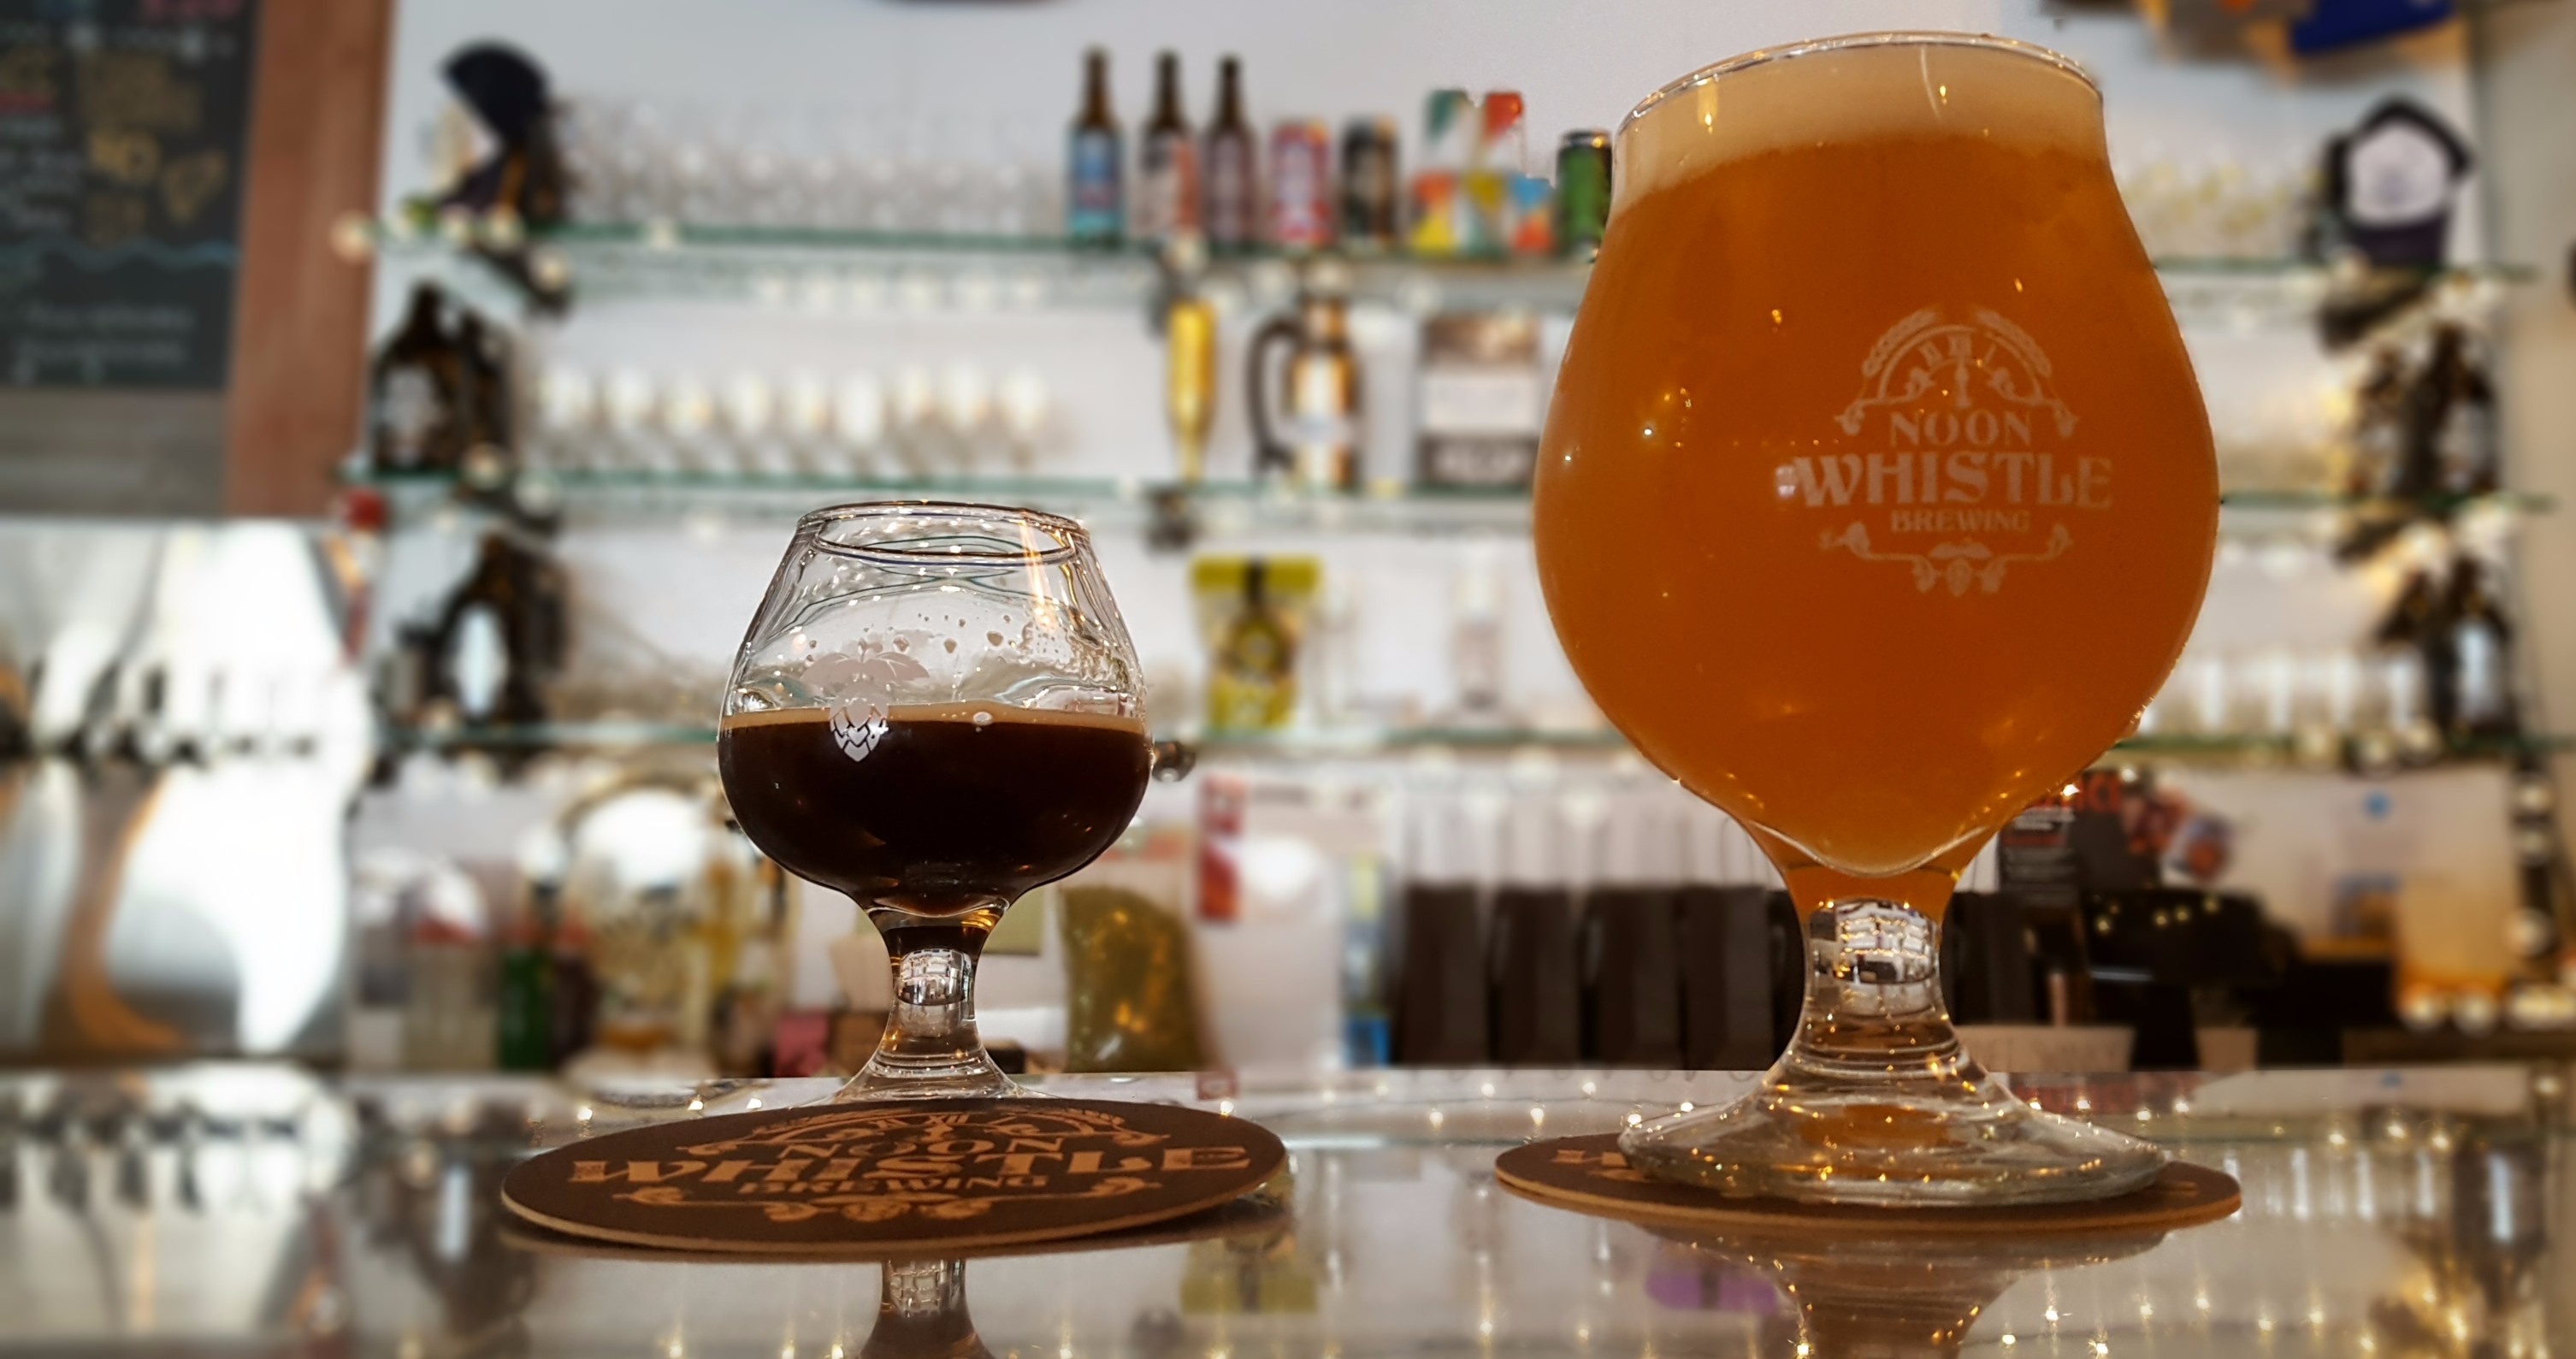 Event Recap | Noon Whistle Brewing Second Anniversary (Chicago)